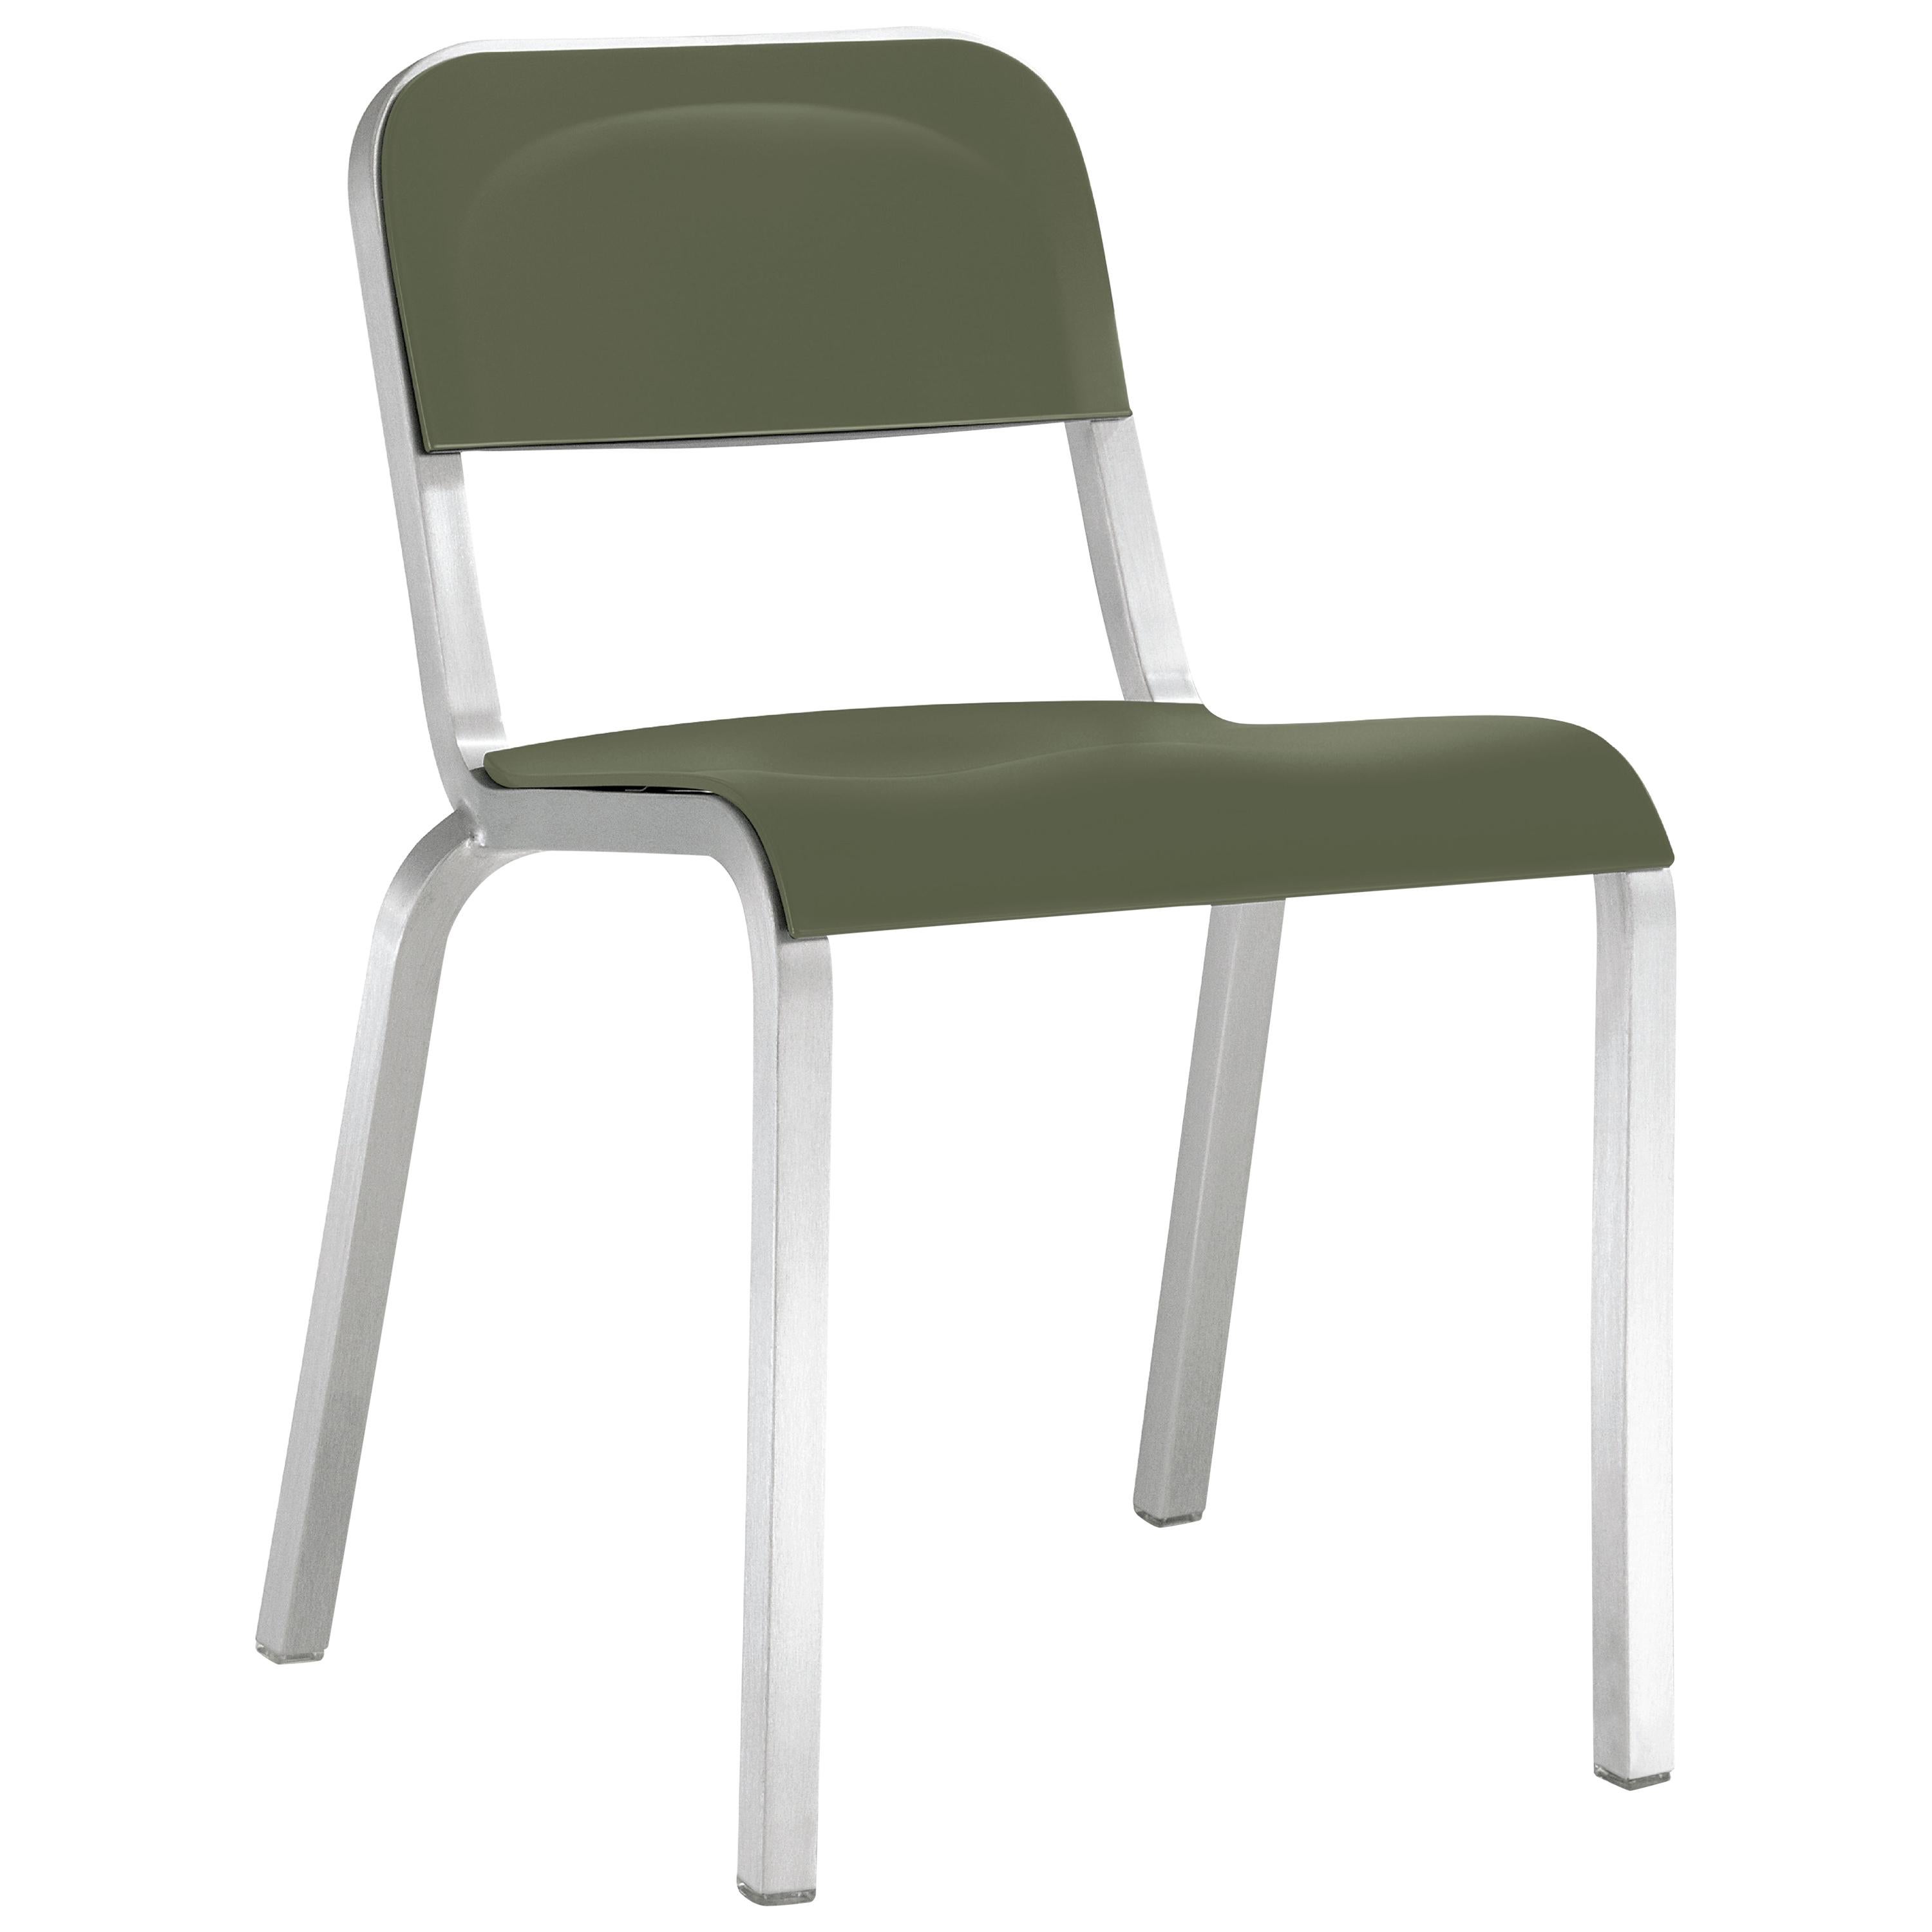 Emeco 1951 Aluminum Stacking Chair with Green Seat by Adrian Van Hooydonk For Sale